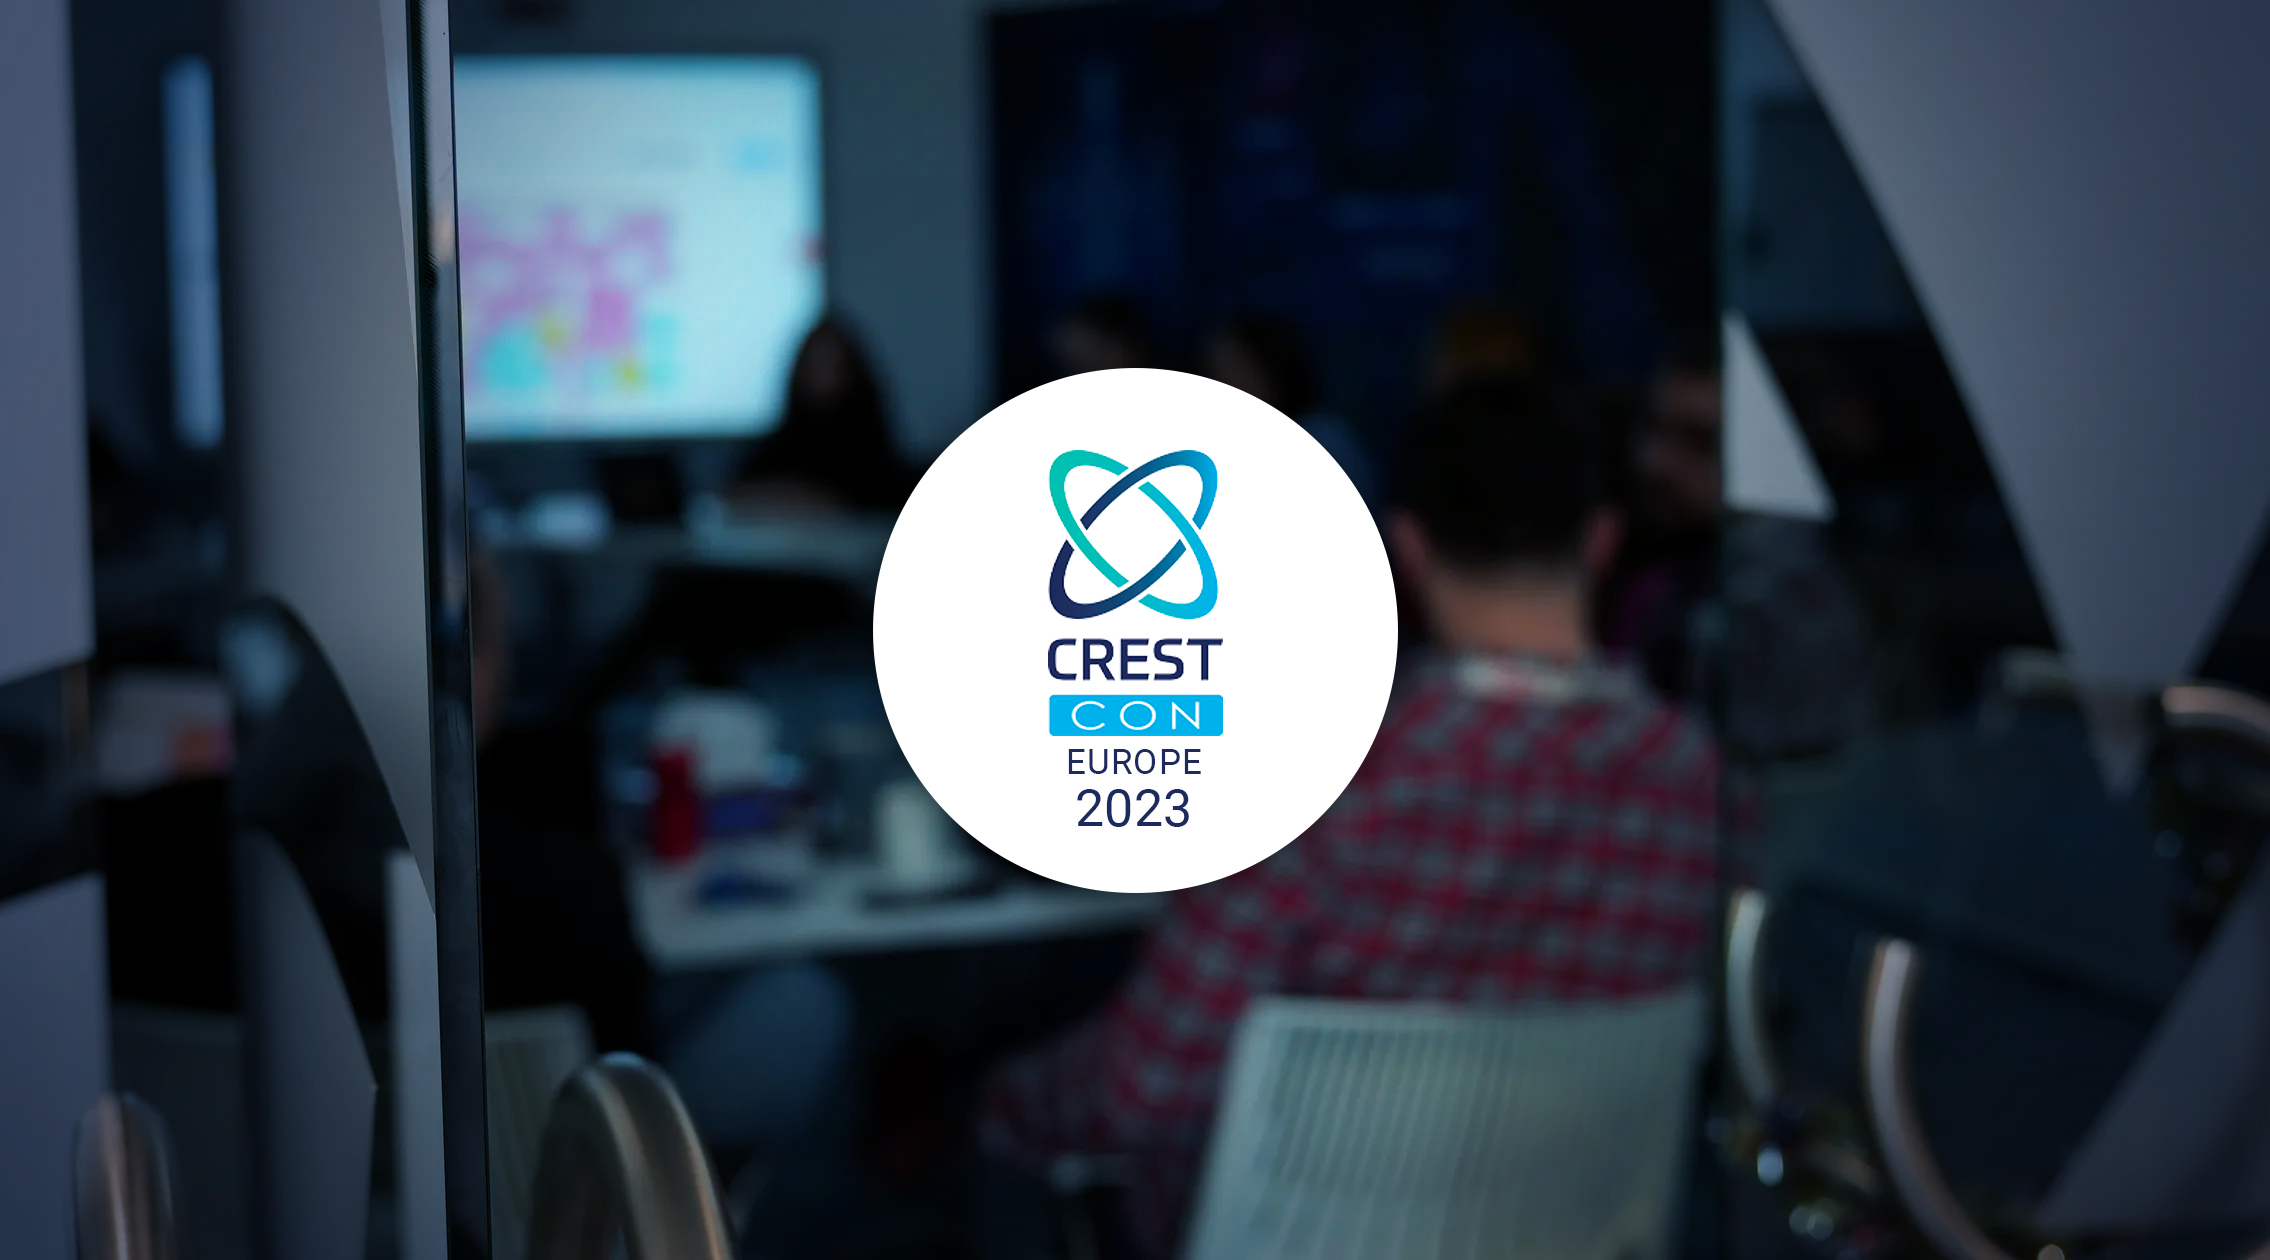 A look back at the event that gathered together cybersecurity specialists from penetration testing to threat intelligence experts. Insights from CRESTCon Europe 2023